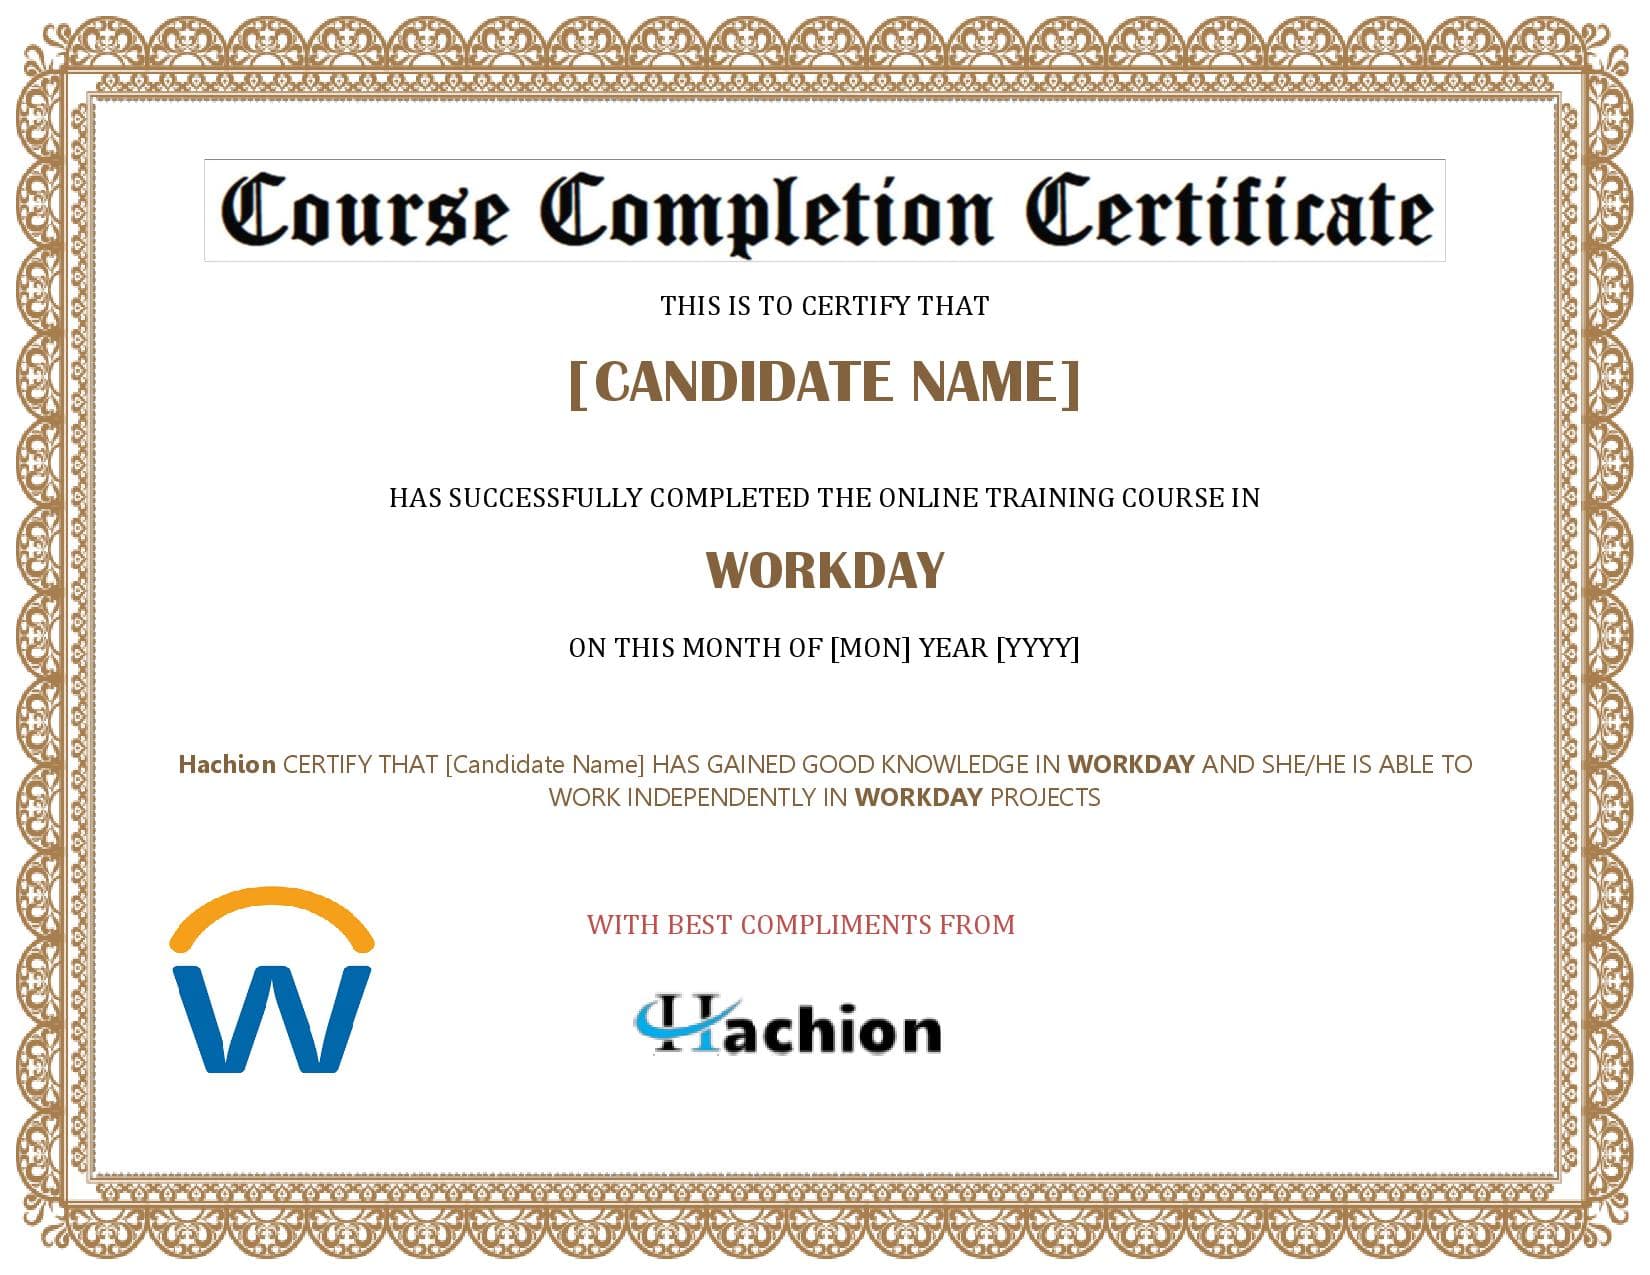 Workday training online course and certification with 24x7 support Hachion